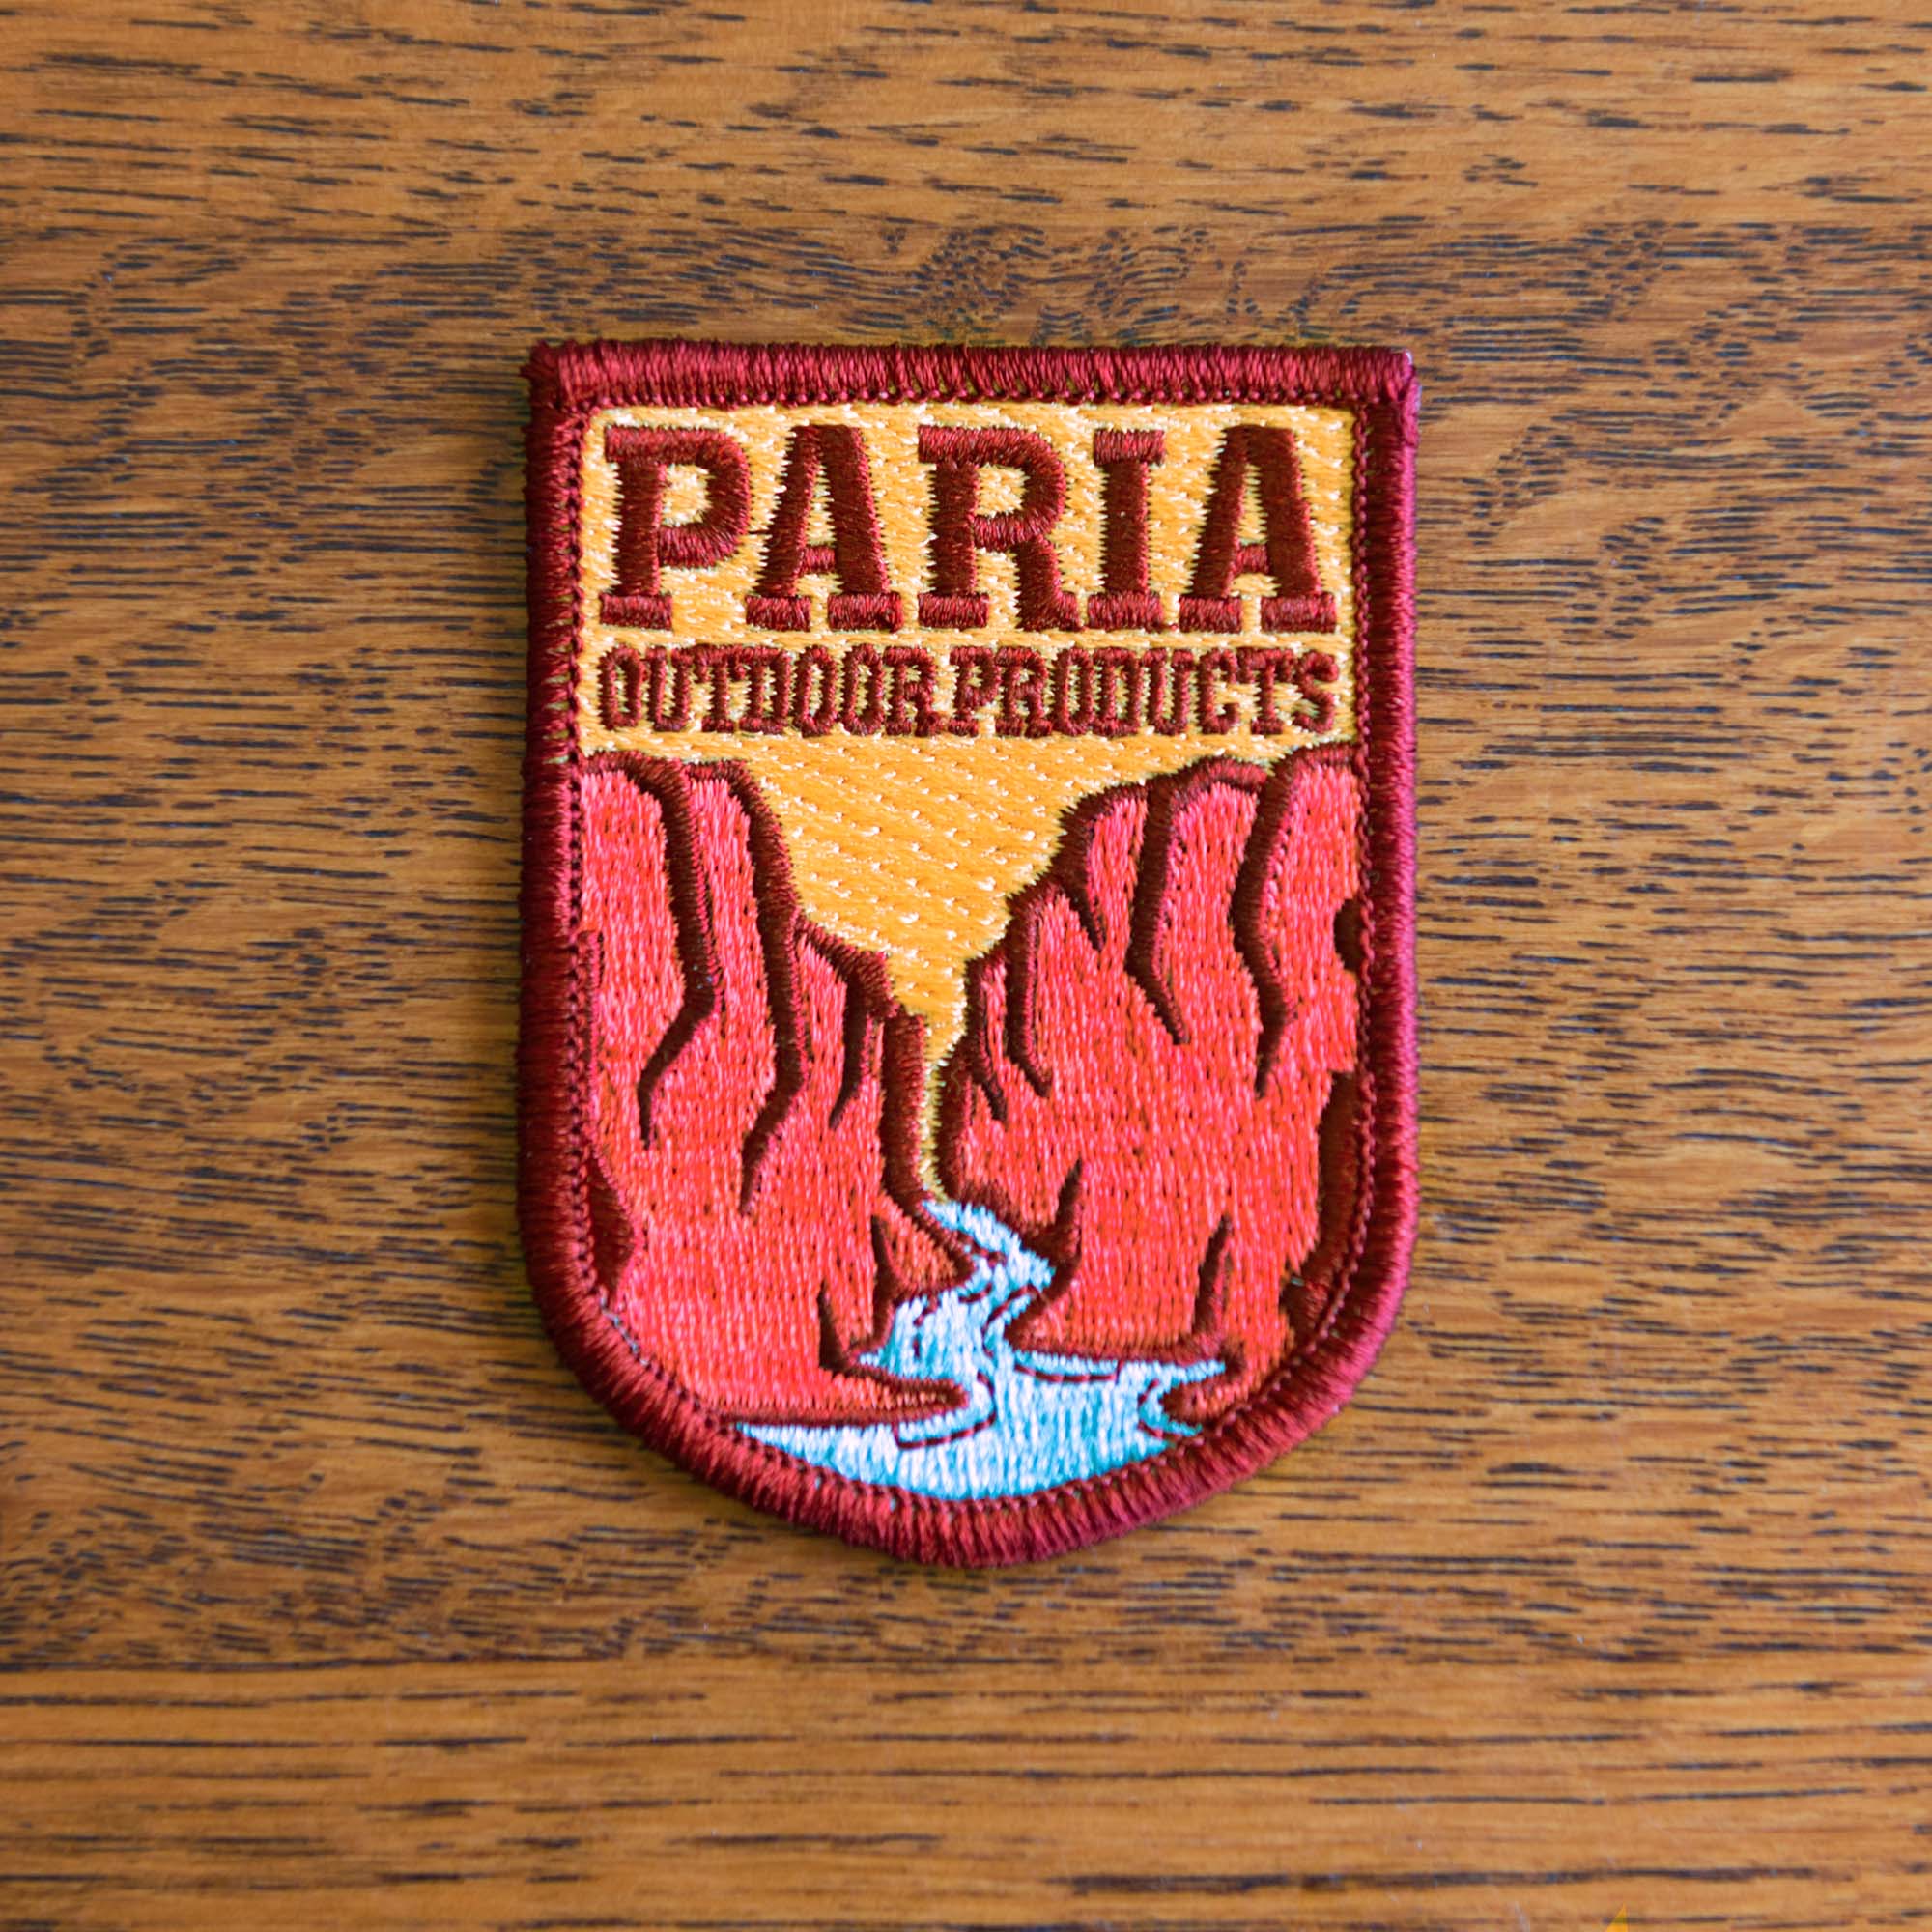 Paria Outdoor Products Patches Logo